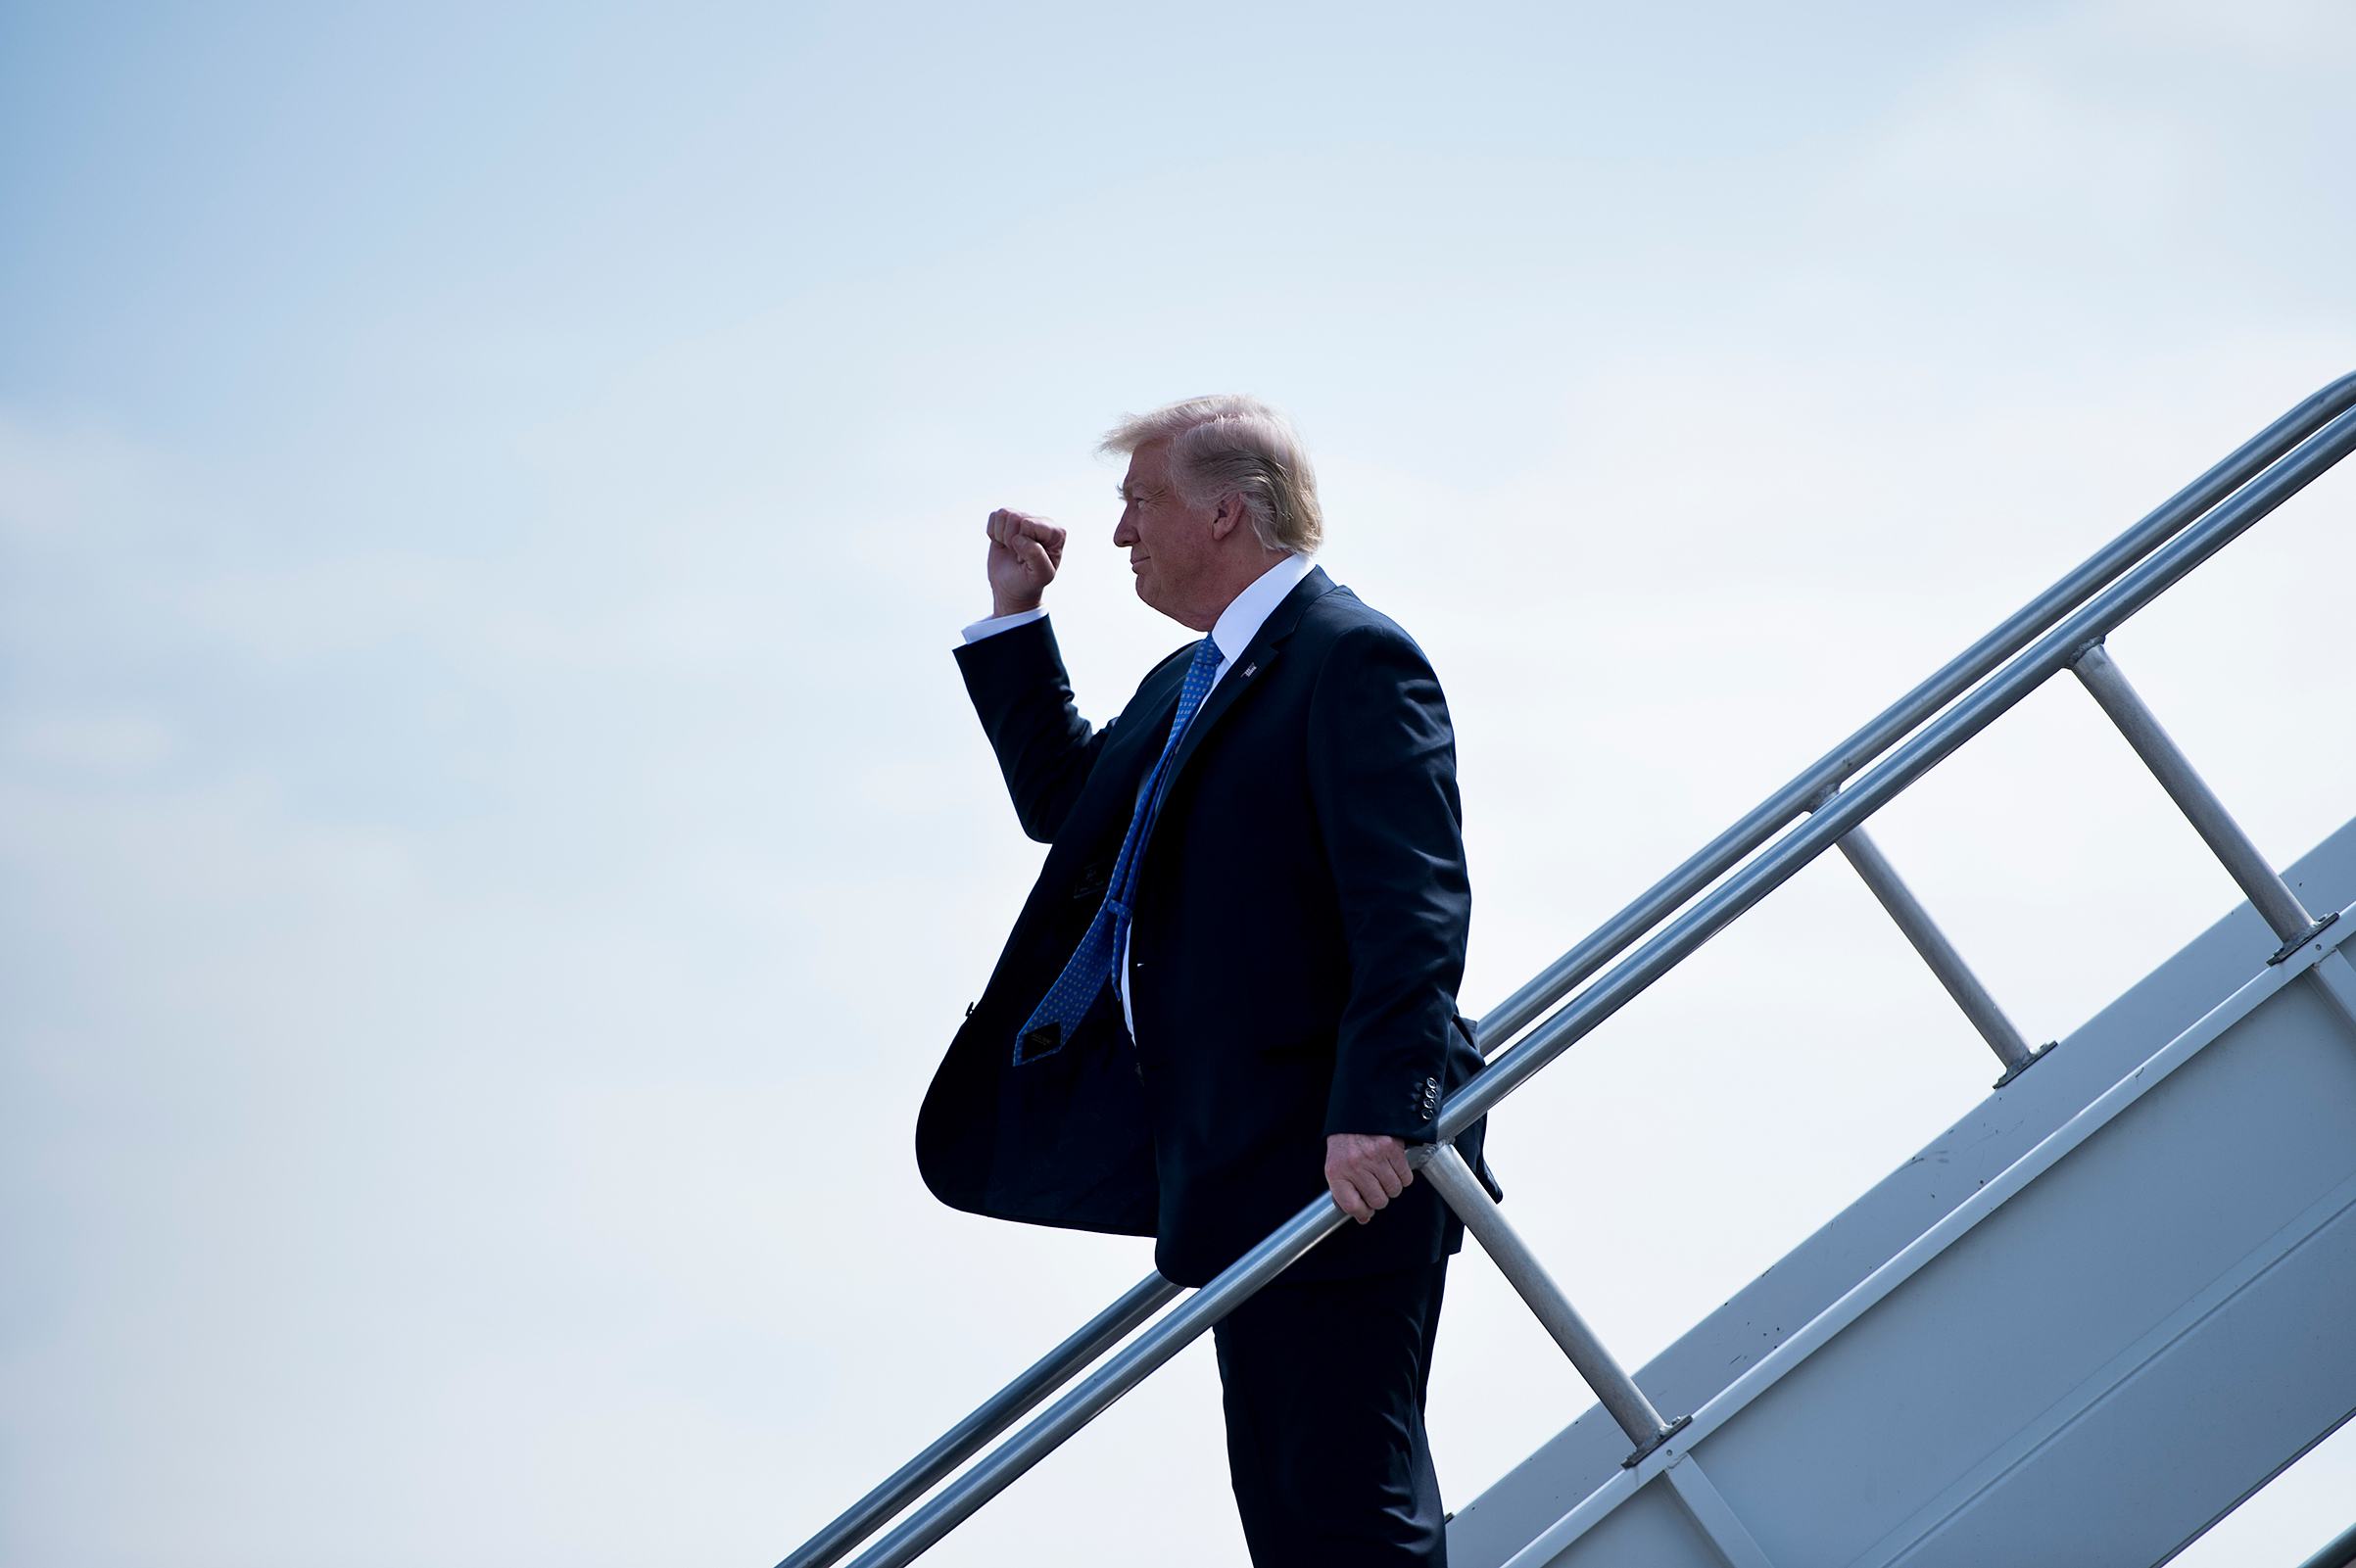 President Donald Trump arrives at Indianapolis International Airport Sept. 27, 2017 in Indianapolis. (Brendan Smialowski —AFP/Getty Images)